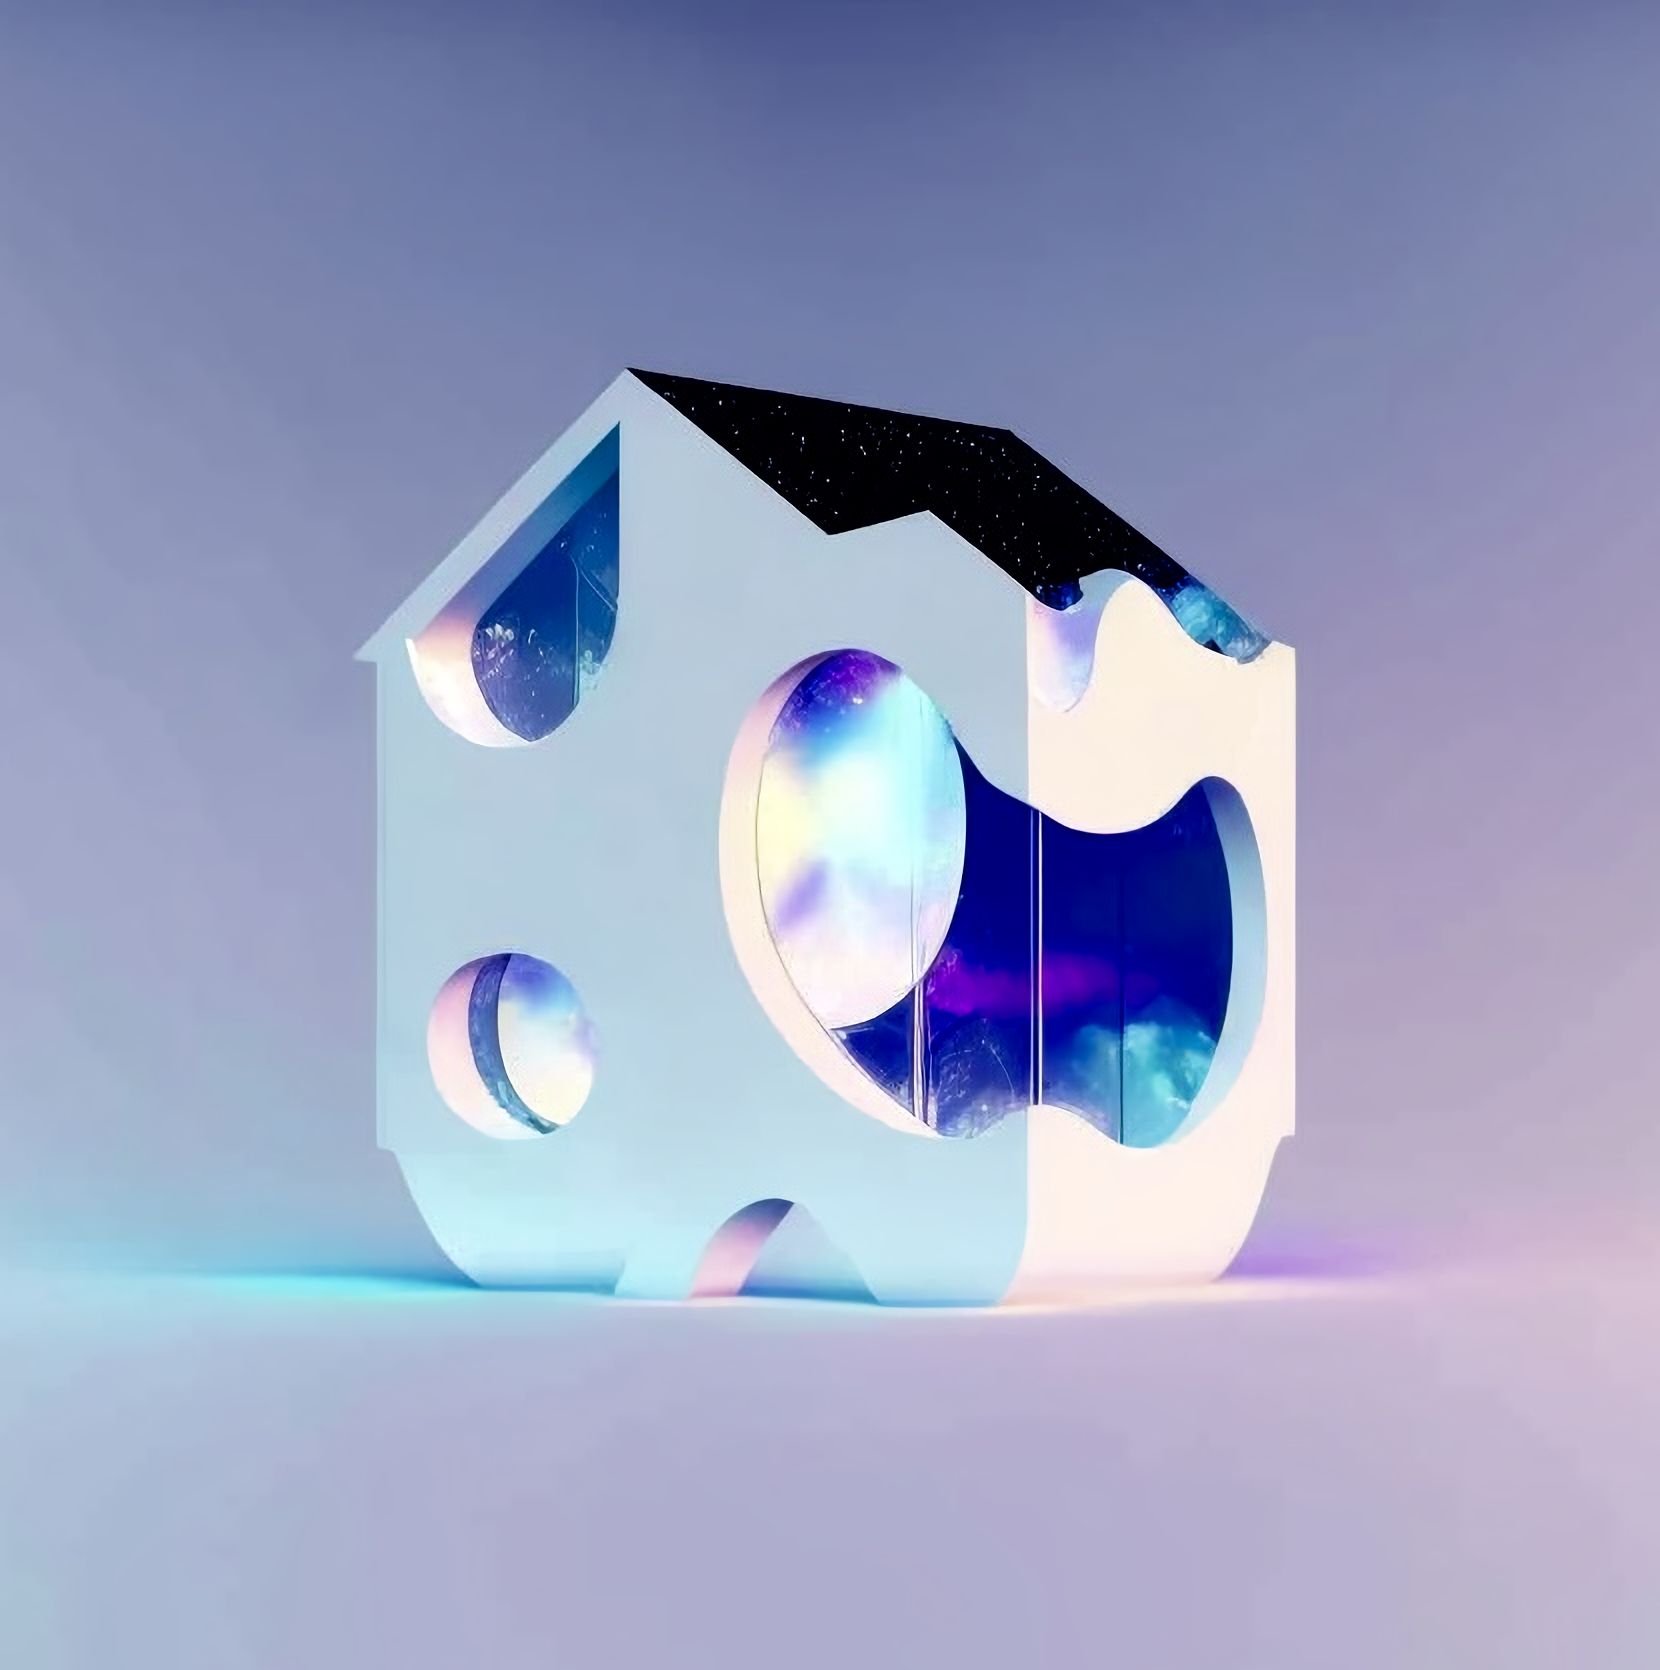 'We Are Desco' Contest Invites You to Design Homes in the Metaverse